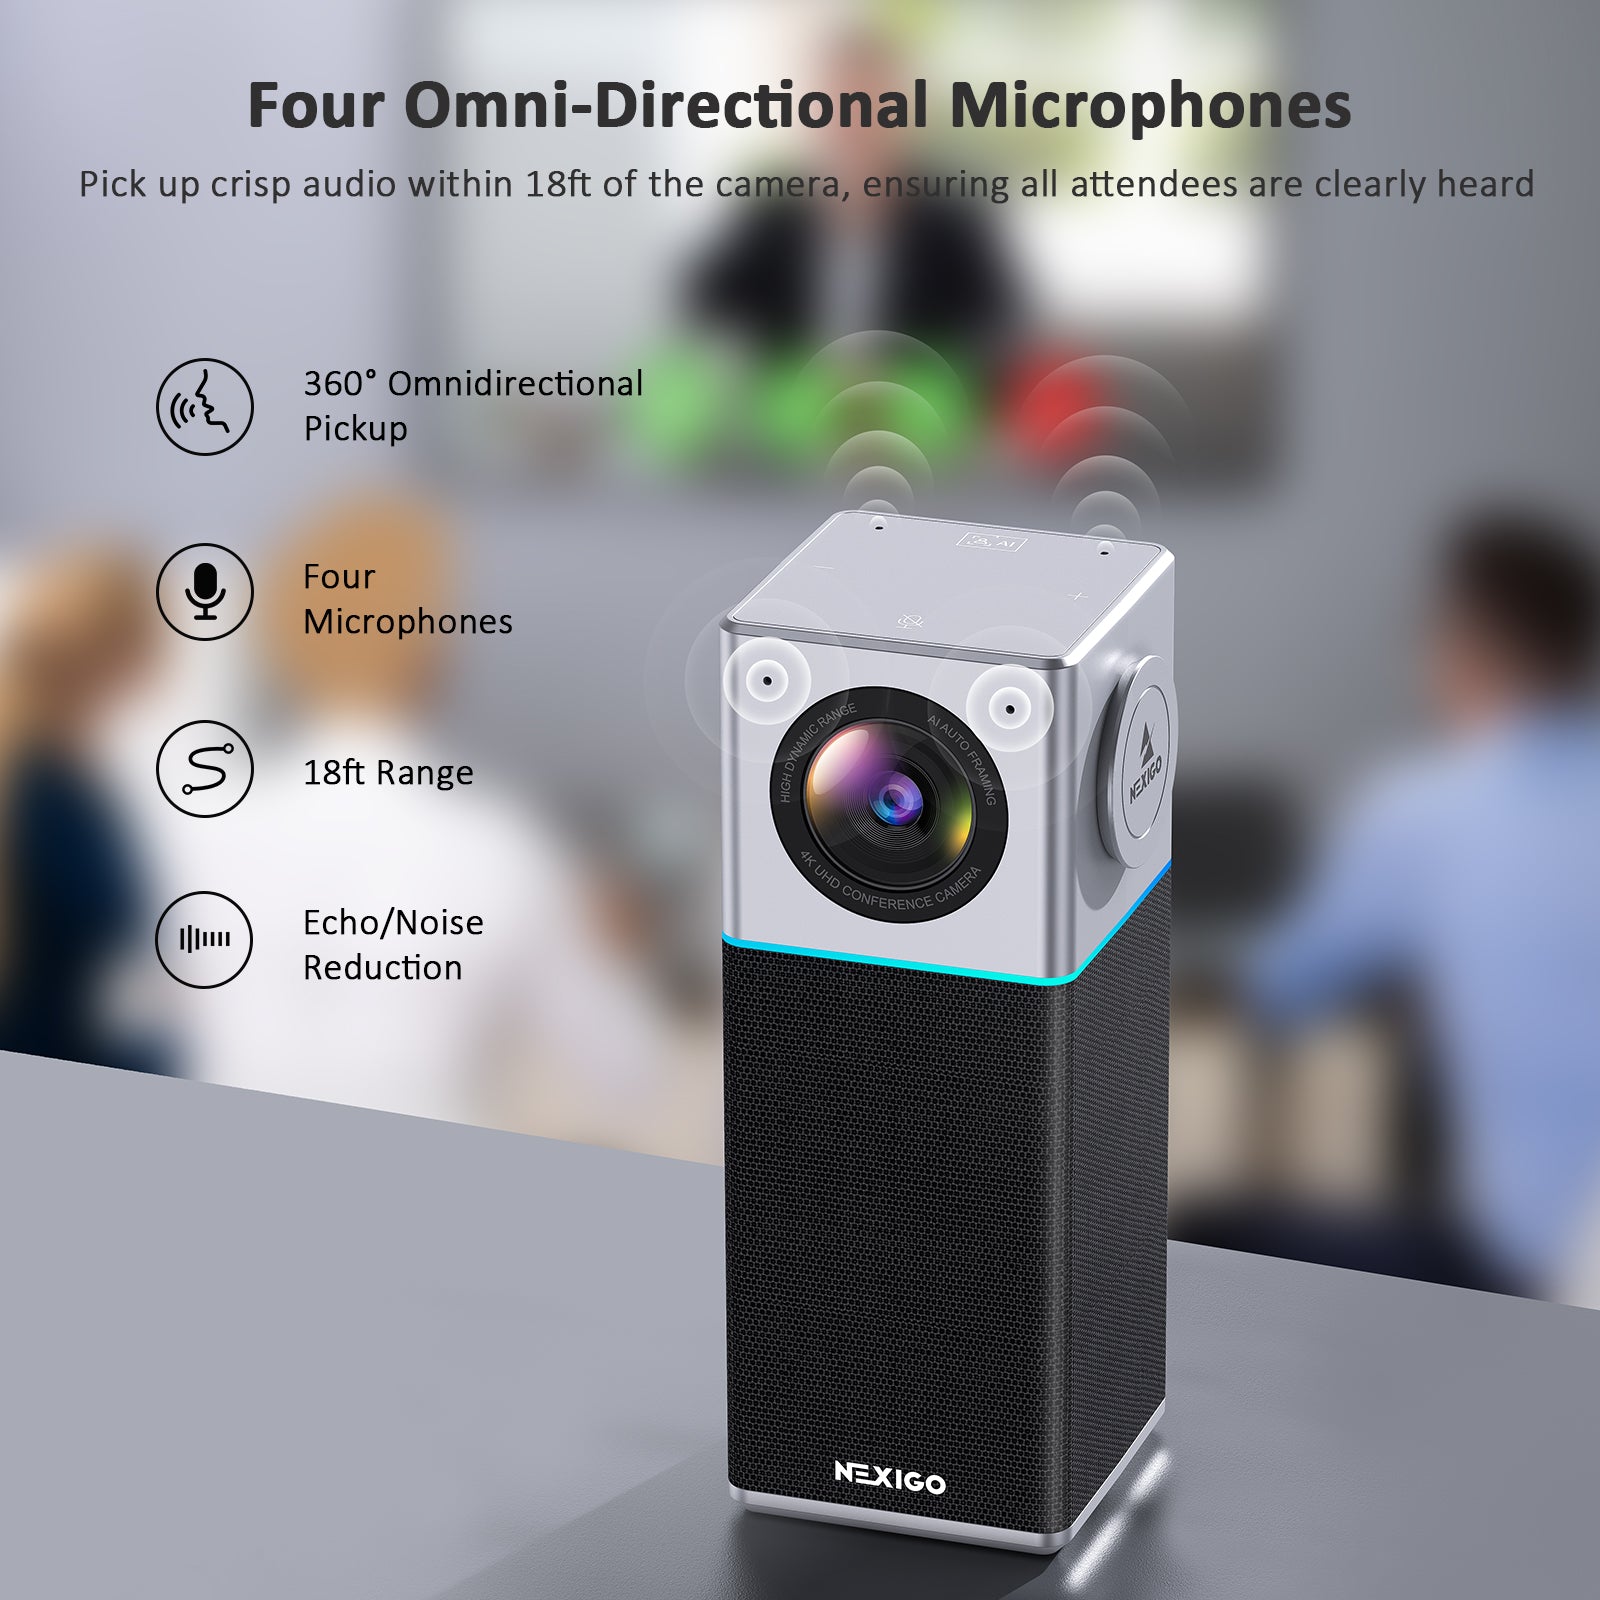 The Conference Camera has 4 microphones for 360° spatial audio pickup, with a maximum range of 18ft